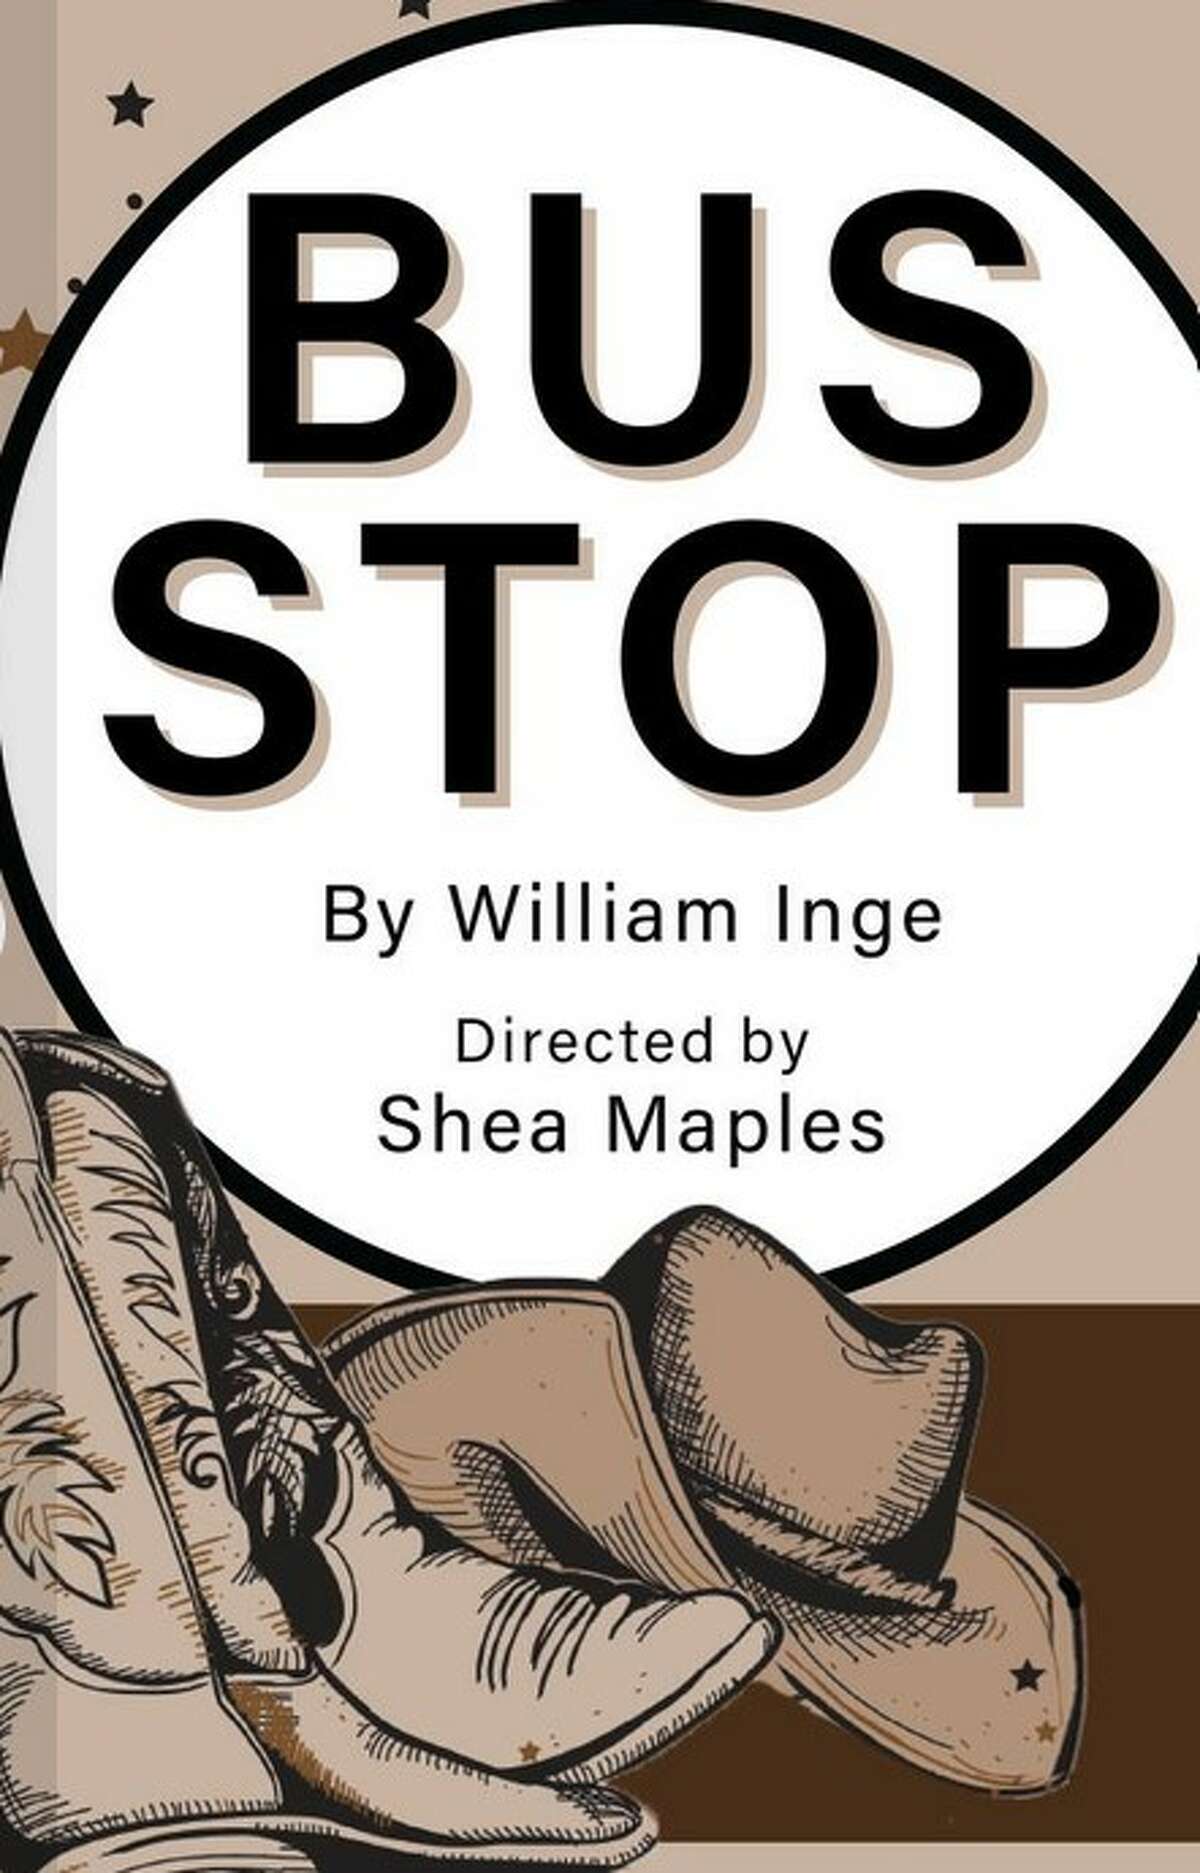 "Bus Stop," by William Inge, will open Dec. 9 and run through Dec. 19 at Alton Little Theater's Showplace. ALT's Shea Maples is directing this year's revival. "Bus Stop" first took the ALT Showplace stage in 1965.